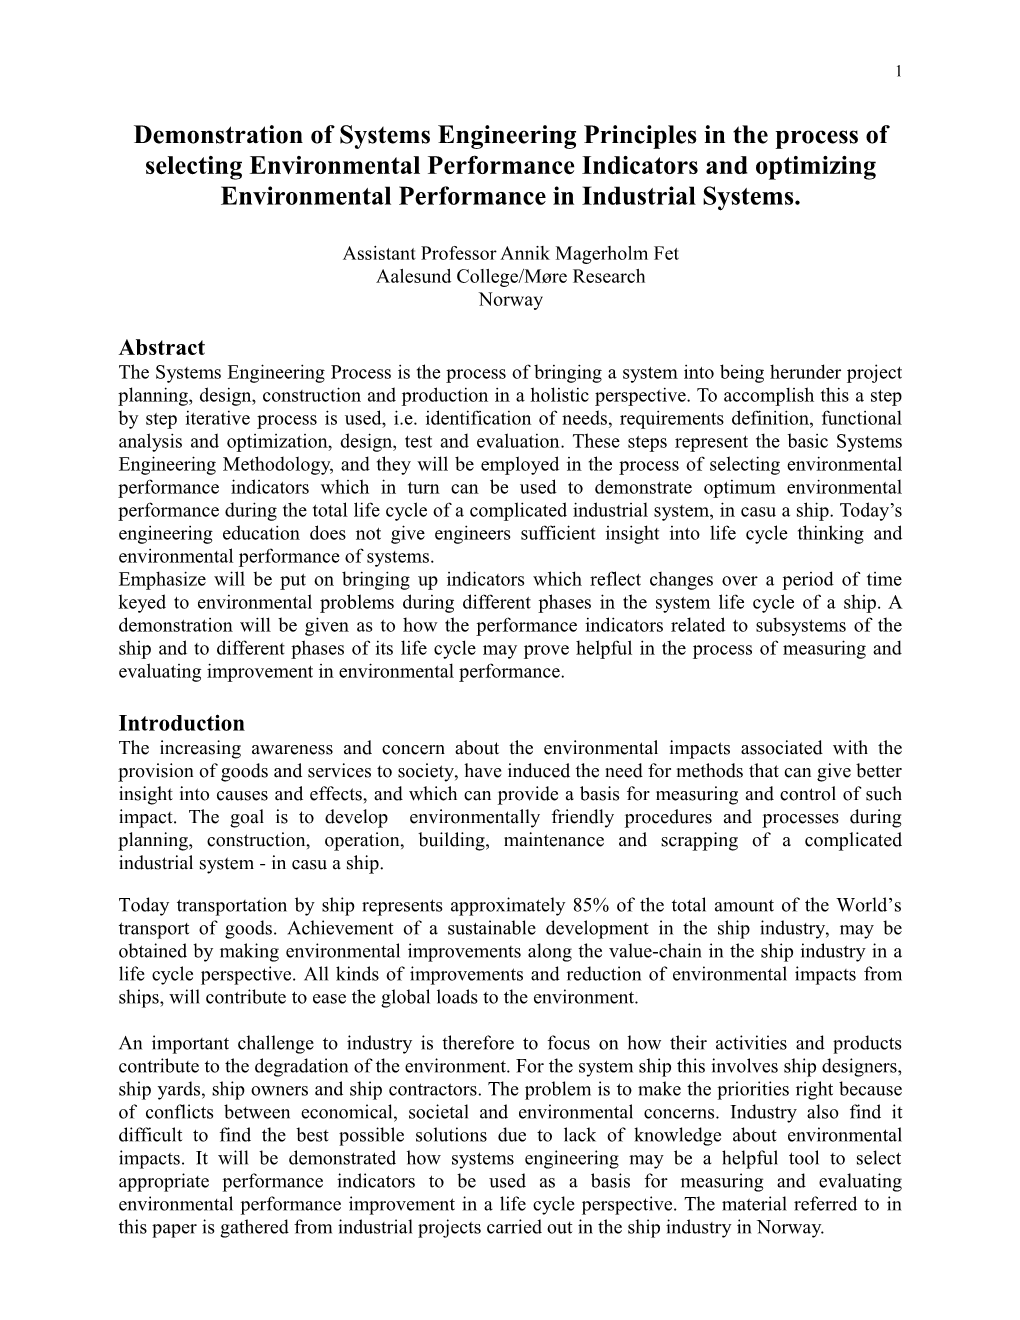 Demonstration of Systems Engineering Principles for the Process of Selecting Environmental